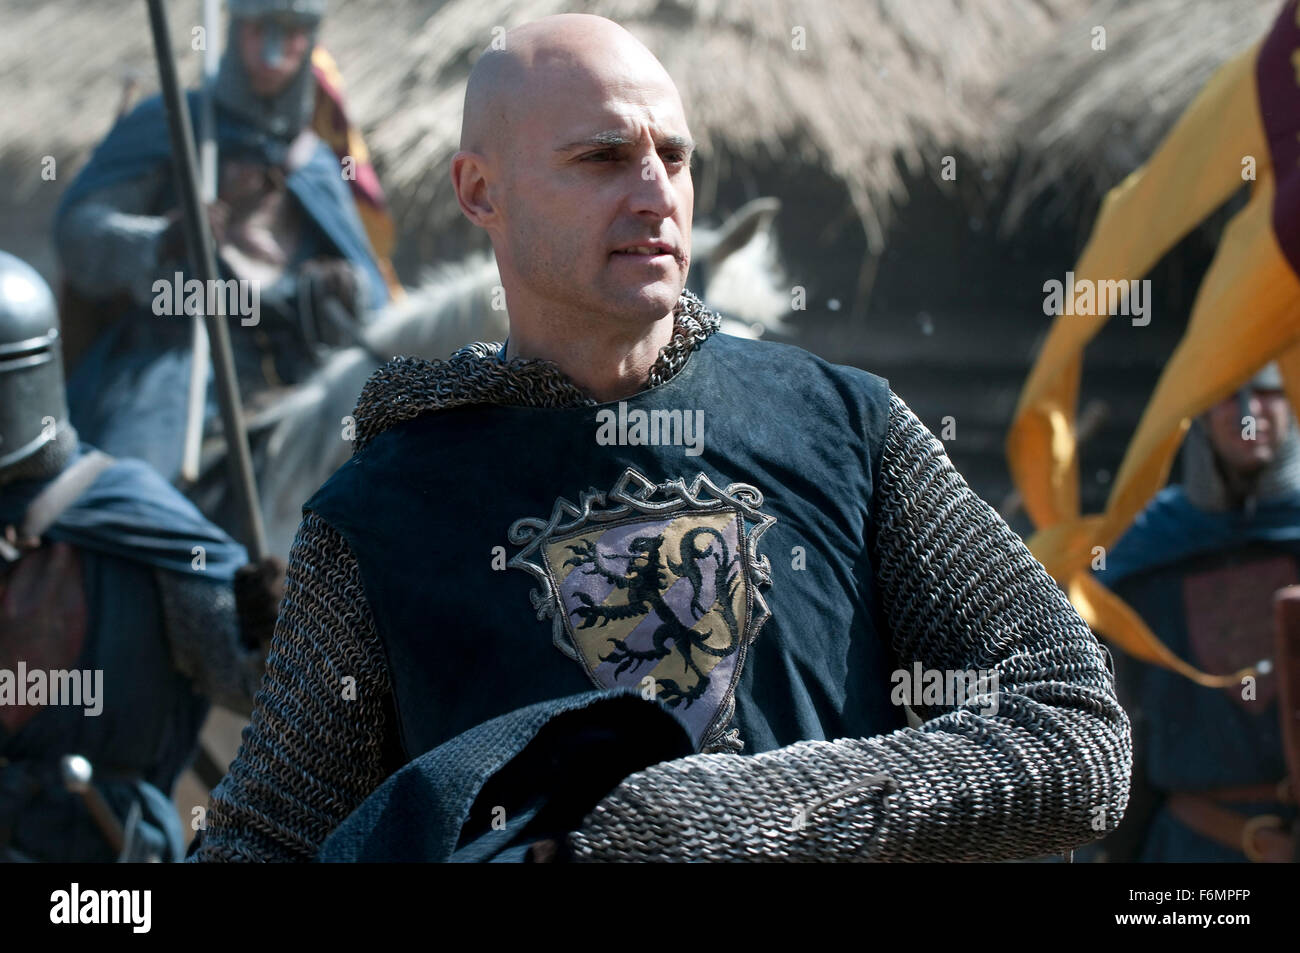 RELEASE DATE: May 14, 2010   MOVIE TITLE: Robin Hood   STUDIO: Universal Pictures   DIRECTOR: Ridley Scott   PLOT: The story of an archer in the army of Richard Coeur de Lion who fights against the Norman invaders and becomes the legendary hero known as Robin Hood   PICTURED: MARK STRONG as Godfrey   (Credit Image: c Universal Pictures/Entertainment Pictures) Stock Photo